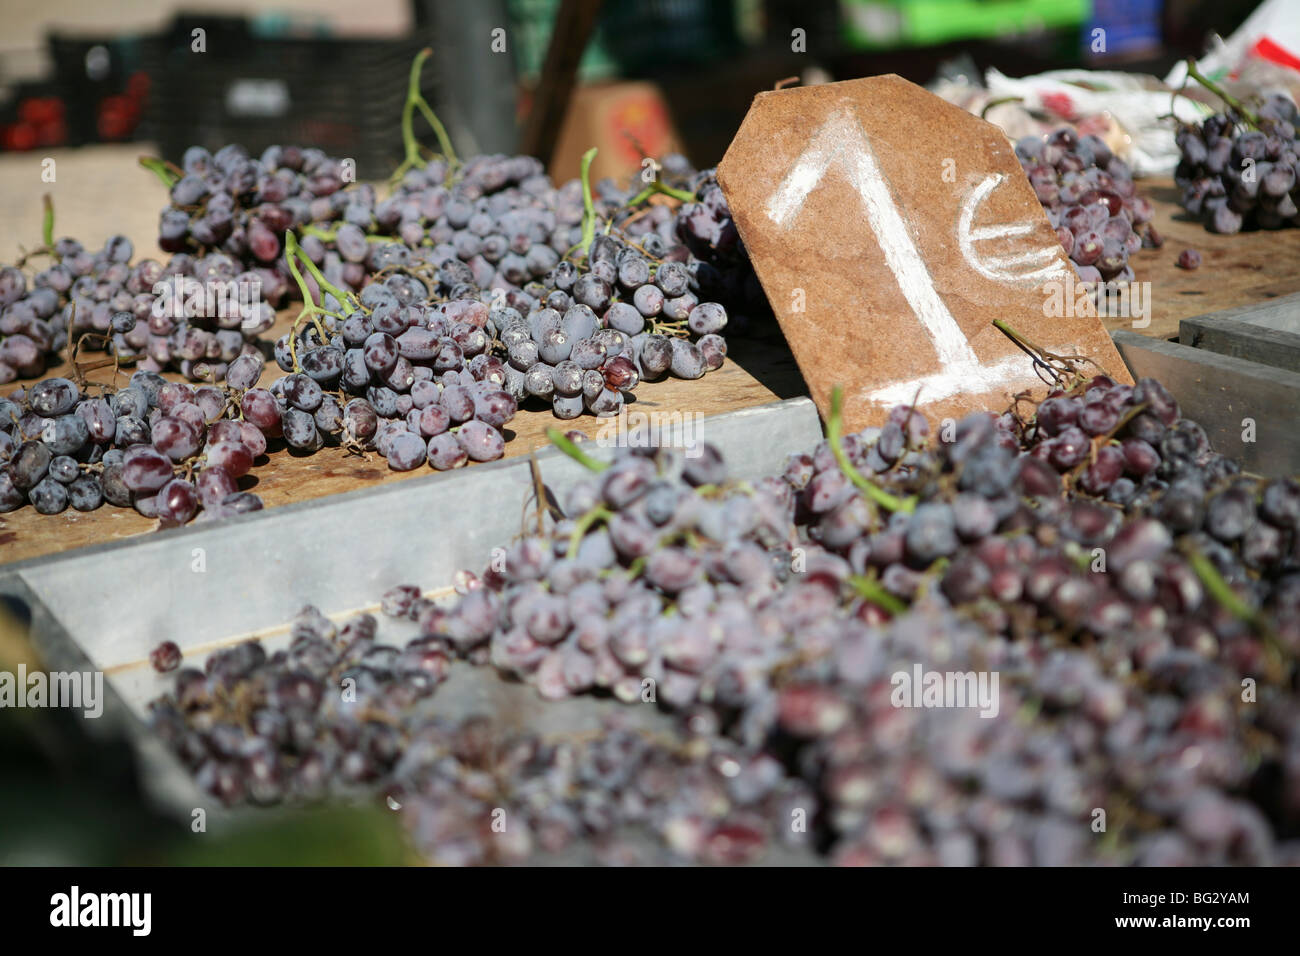 Fresh bunches of purple grapes for sale on a market stall in Spain, Europe, 1 Euro sign / Vitis vinifera Stock Photo